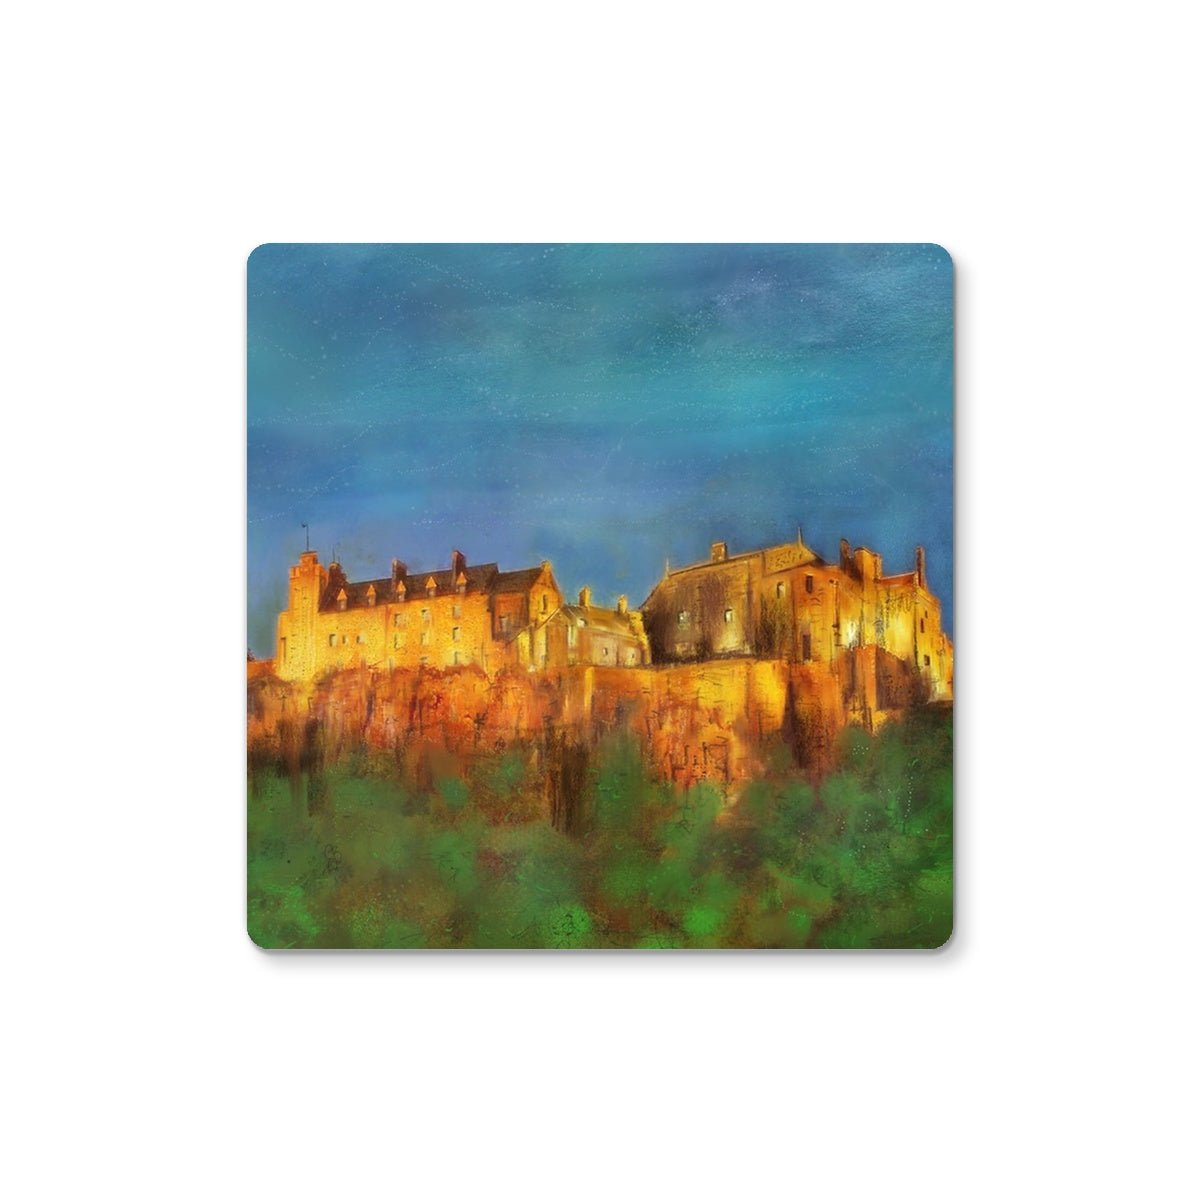 Stirling Castle Art Gifts Coaster-Coasters-Scottish Castles Art Gallery-Single Coaster-Paintings, Prints, Homeware, Art Gifts From Scotland By Scottish Artist Kevin Hunter